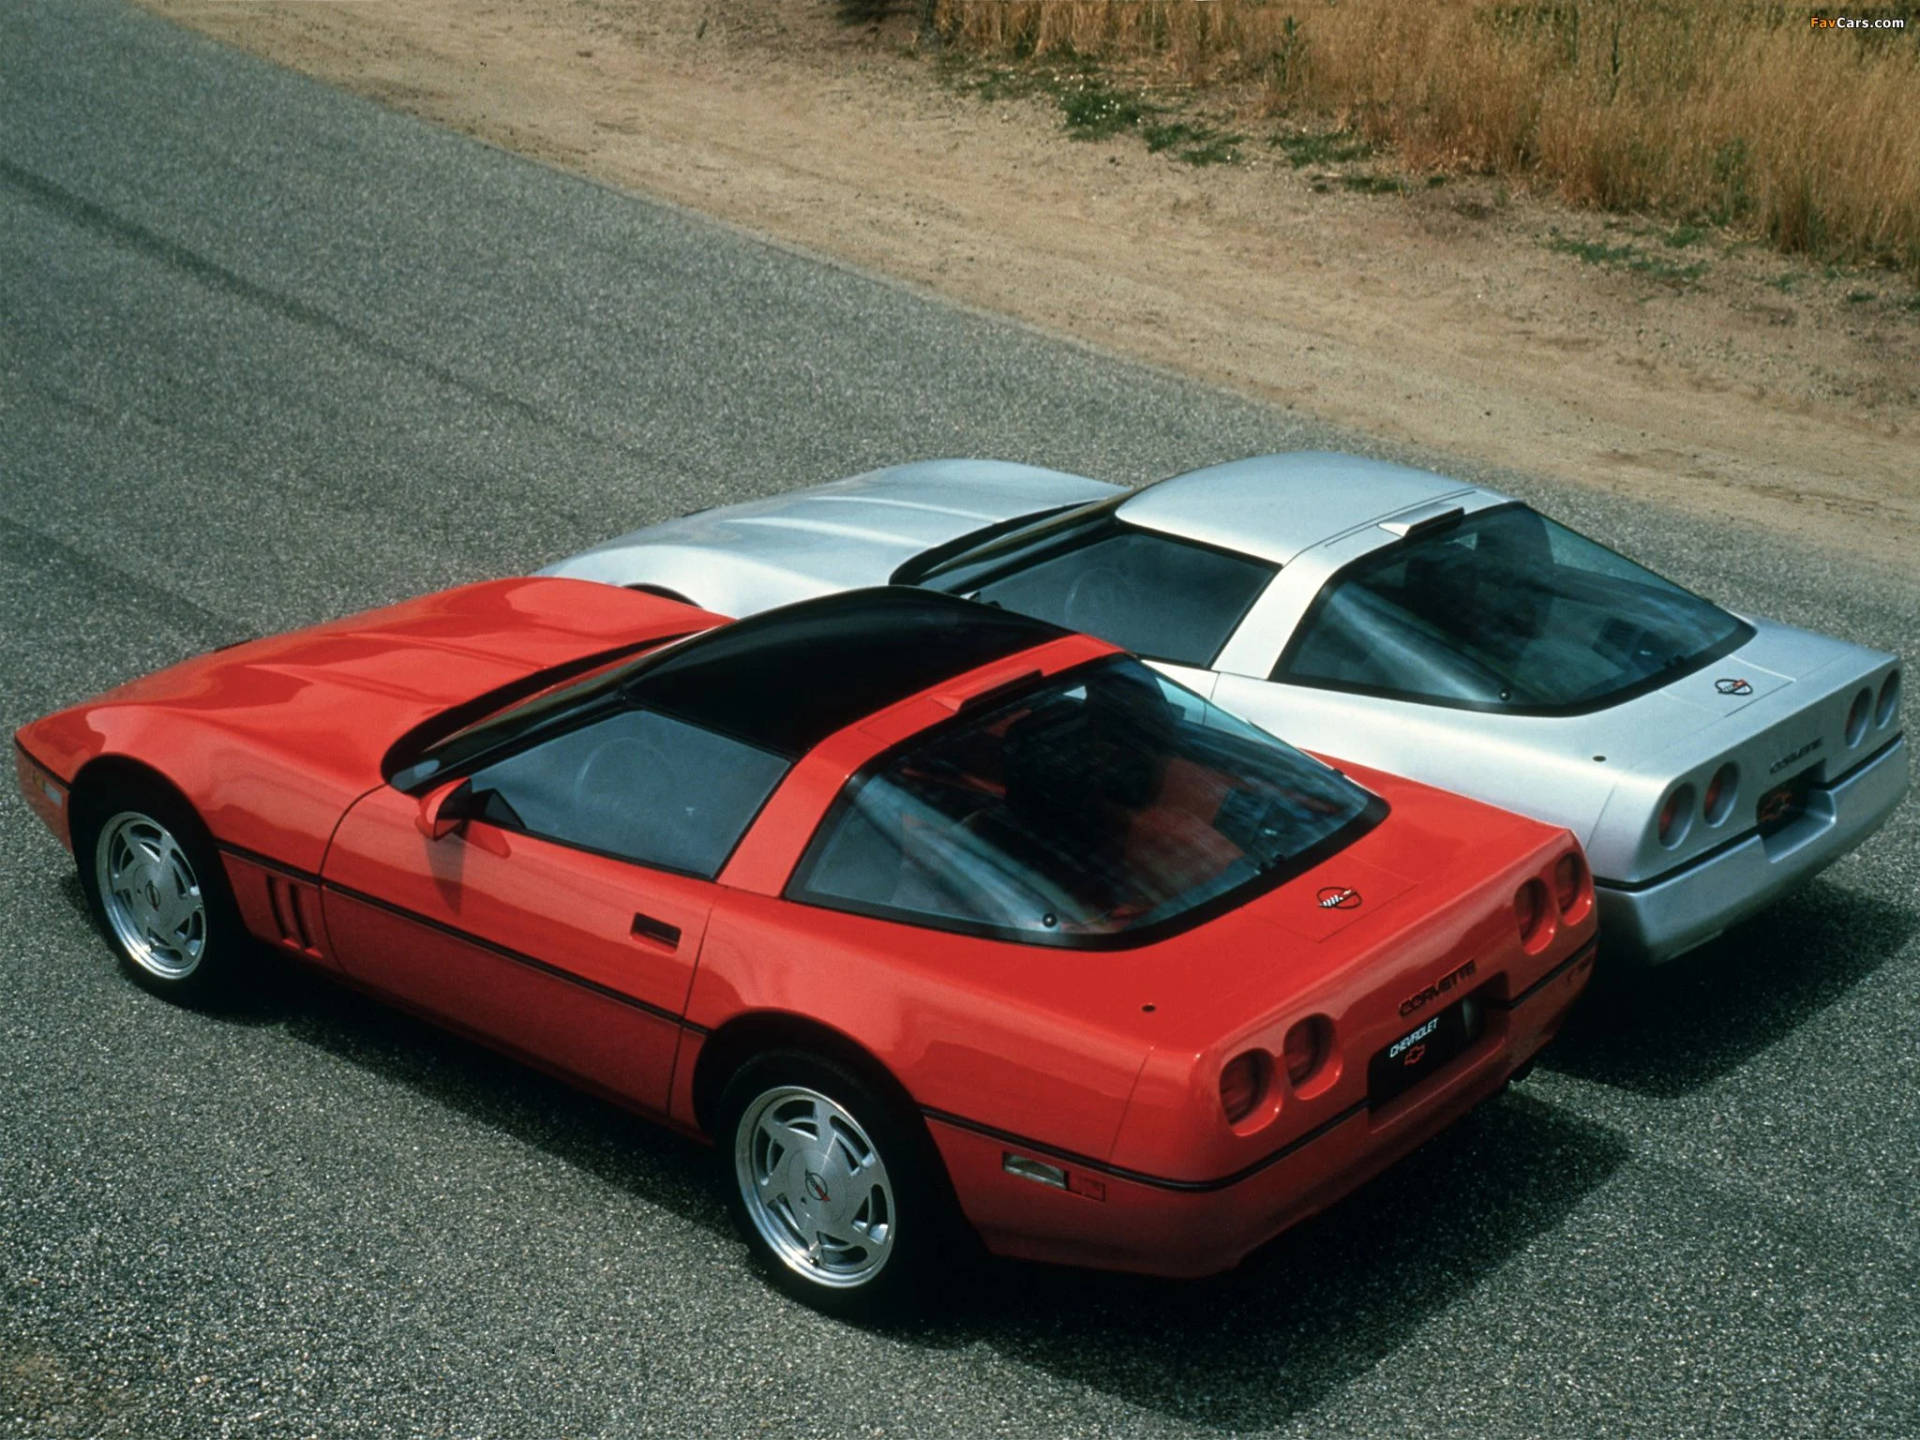 High-speed Elegance: Two C4 Corvettes Racing On Open Roads